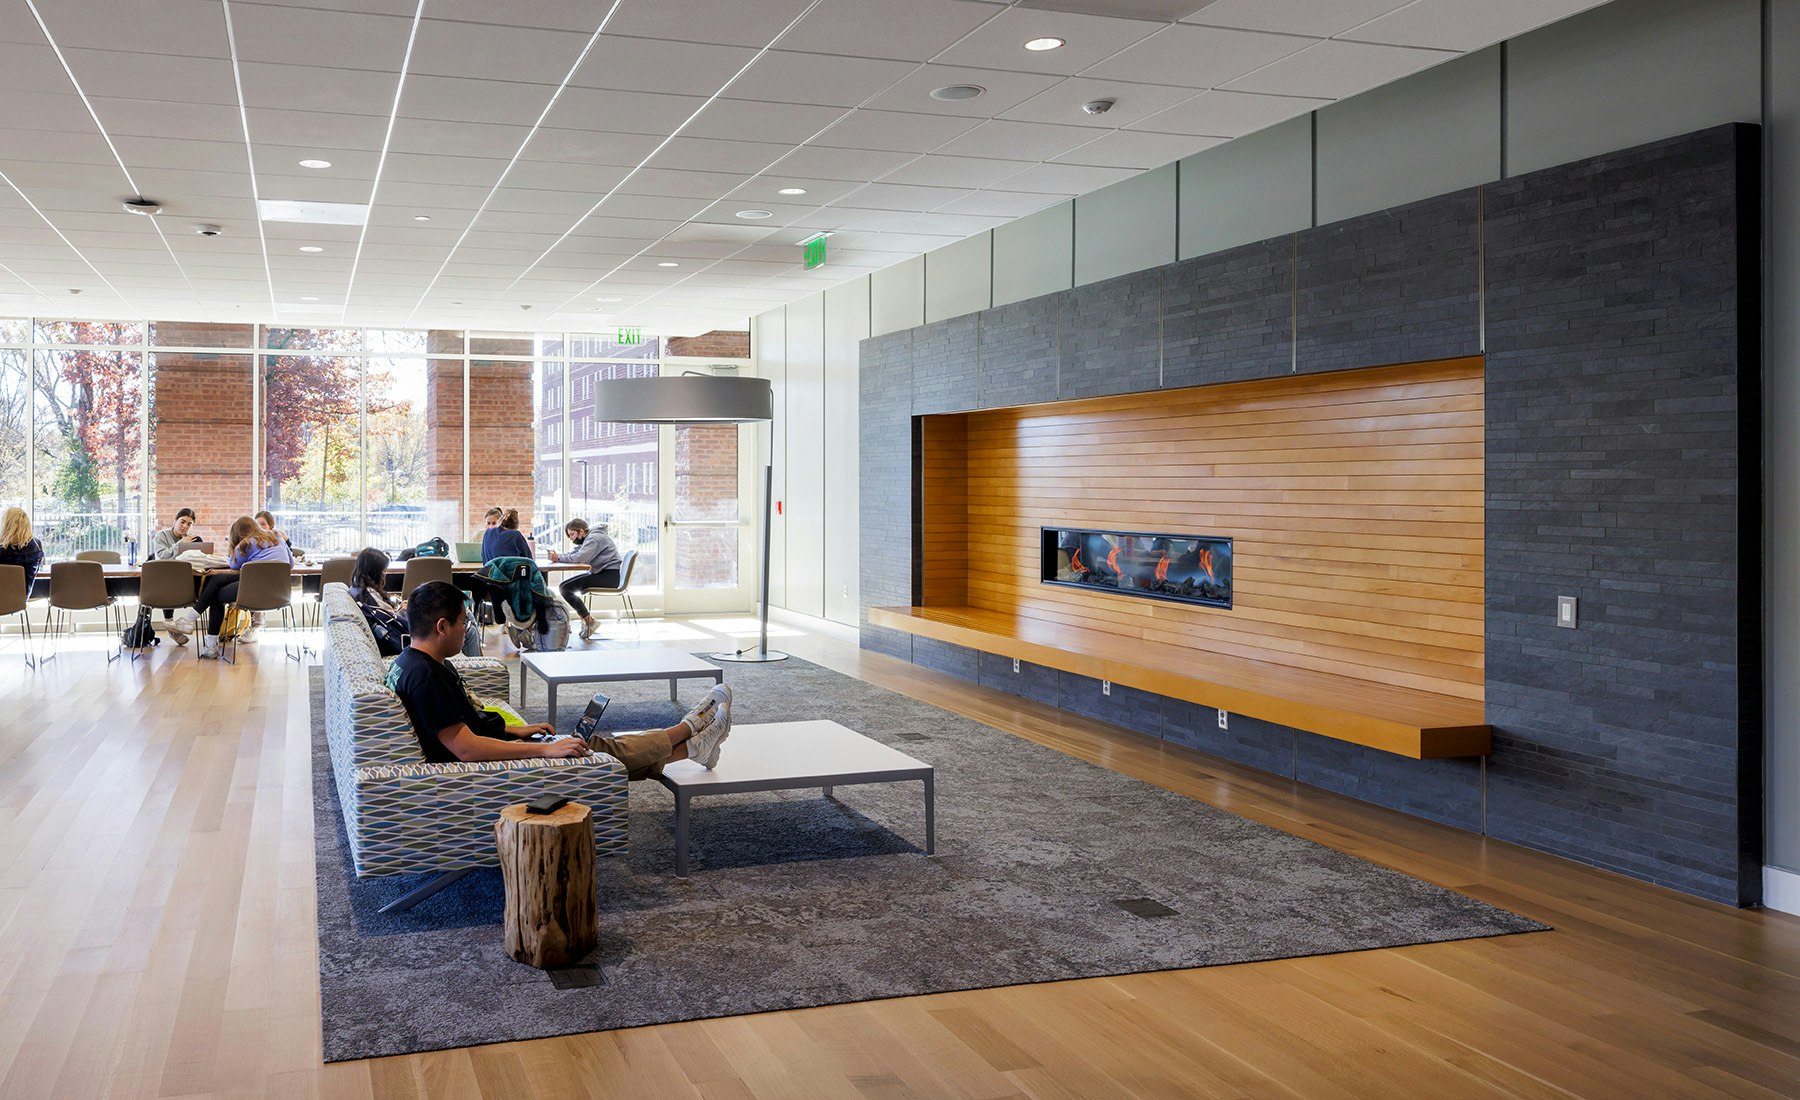 Student Health and Wellness Center, Lobby: The entire building is organized around an open and light-filled entry and multi-story lobby, while generous windows invite daylight into all departments, improving orientation and wayfinding.